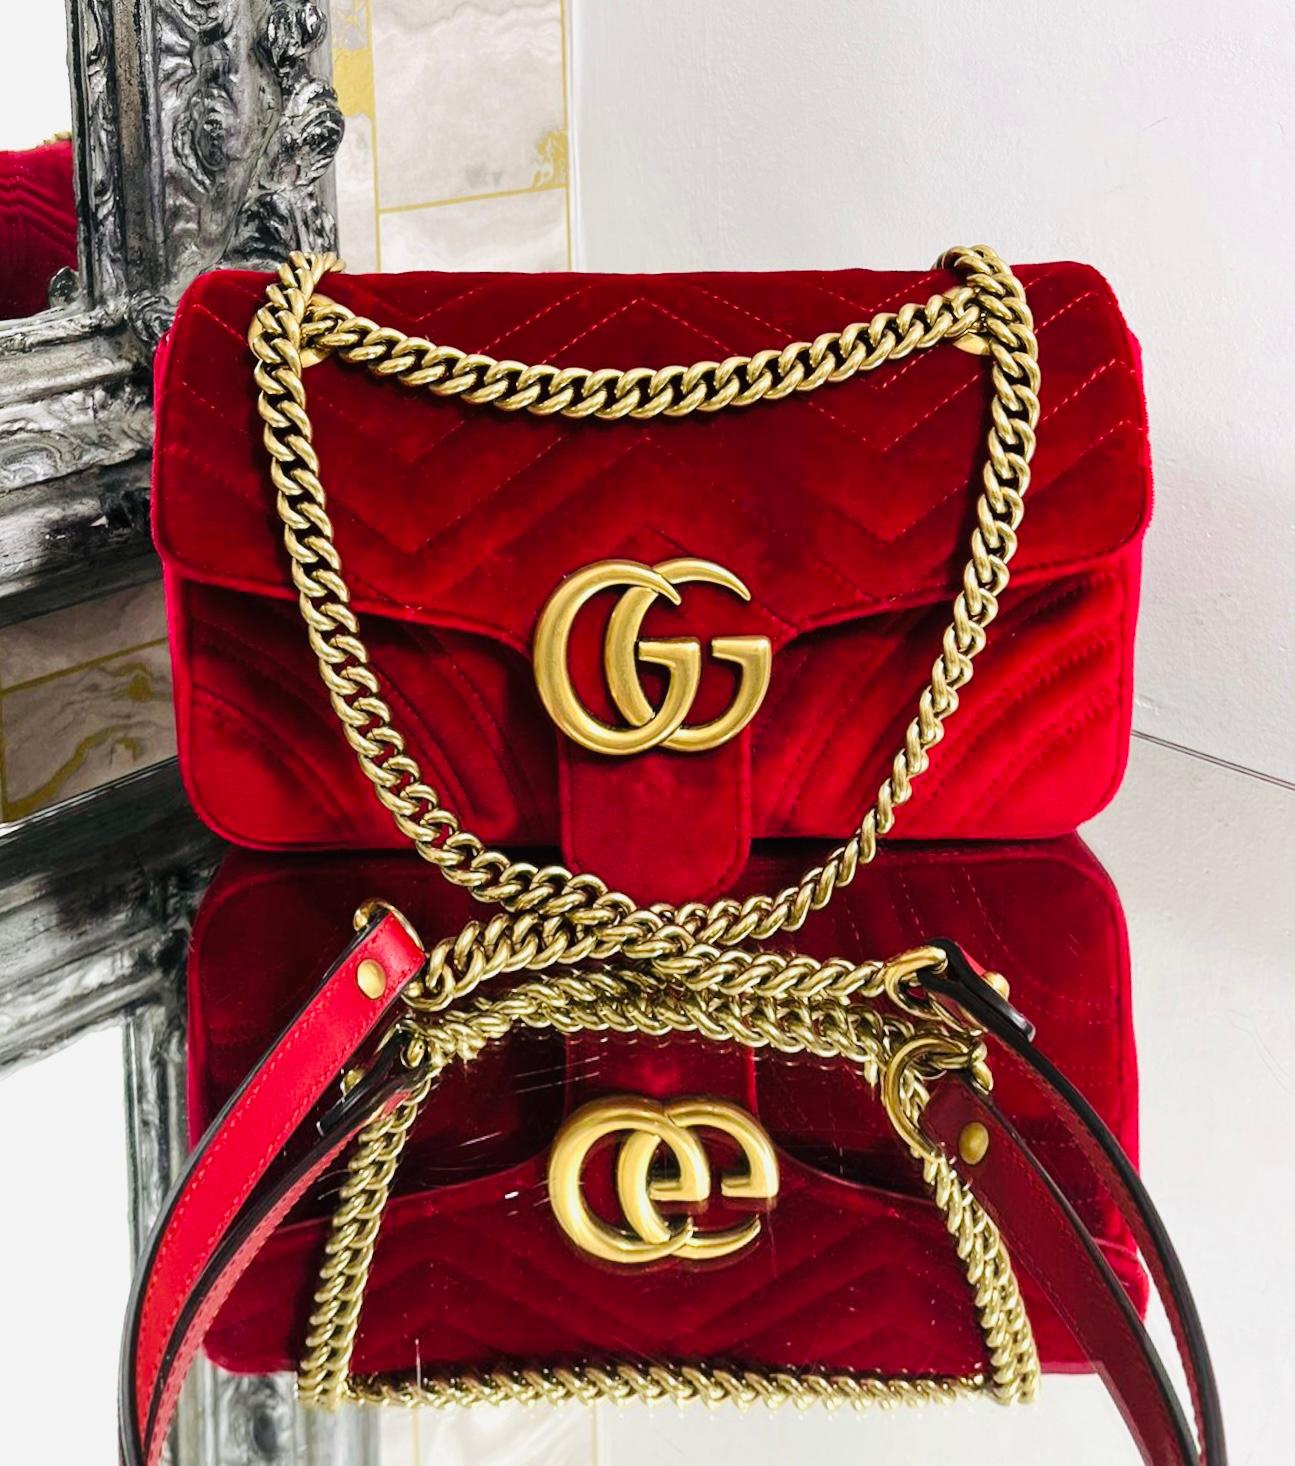 Gucci GG Marmont Small Velvet Bag

Hibiscus red shoulder bag designed with chevron quilting.

Detailed with heart stitched to rear and 'GG' logo front flap closure.

Featuring aged gold hardware and chain link strap with leather shoulder